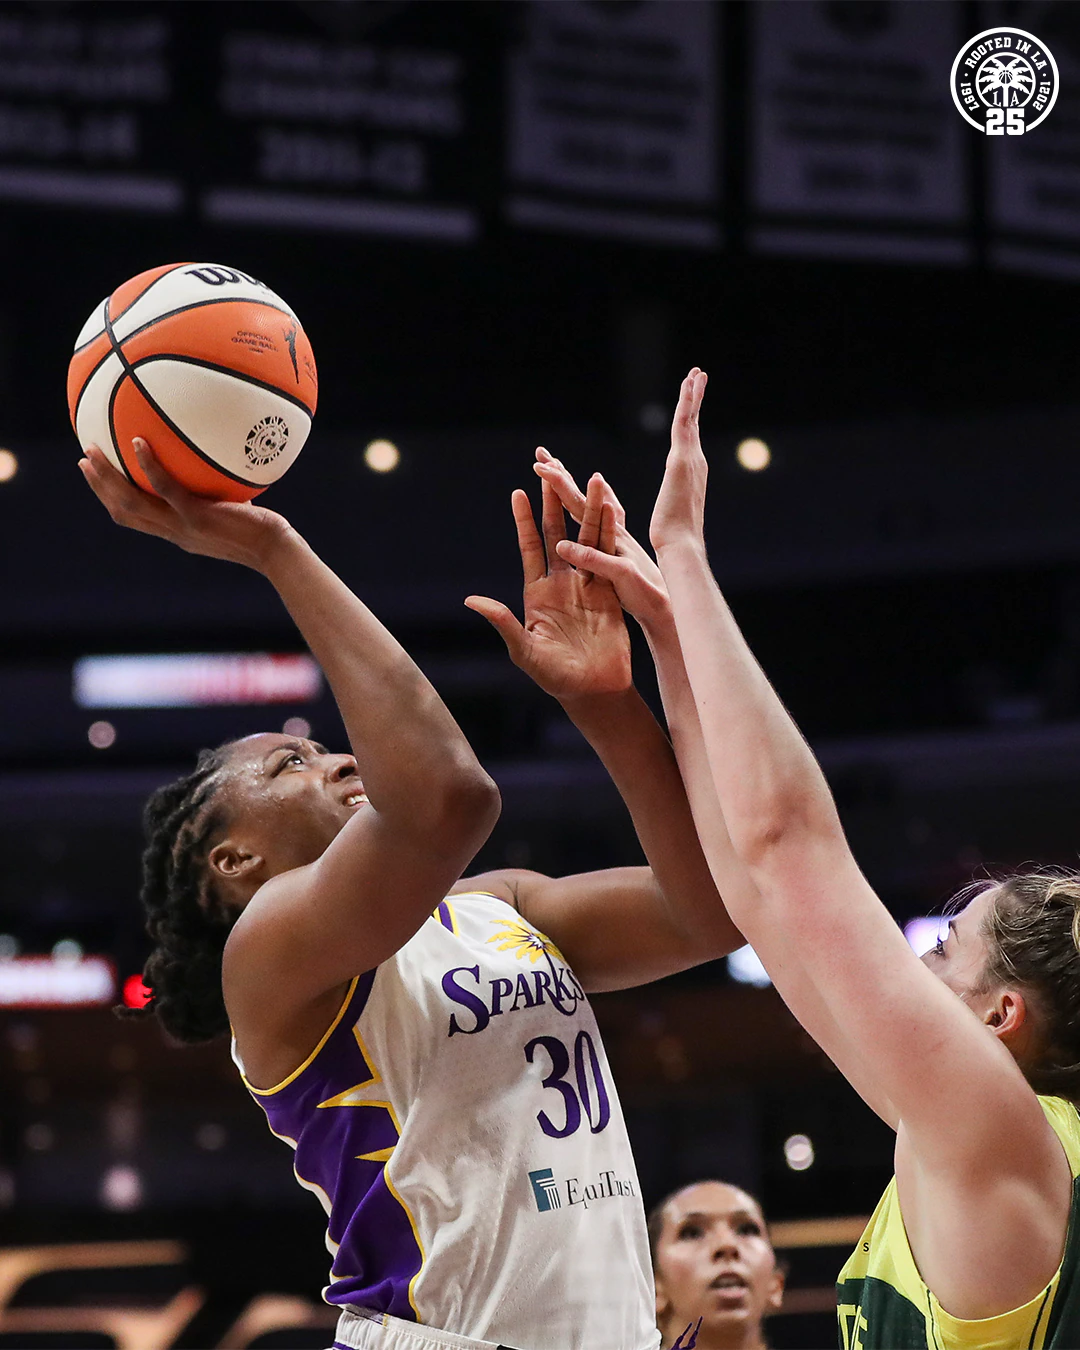 WNBA Preview: Sparks face Dream in a must-win game